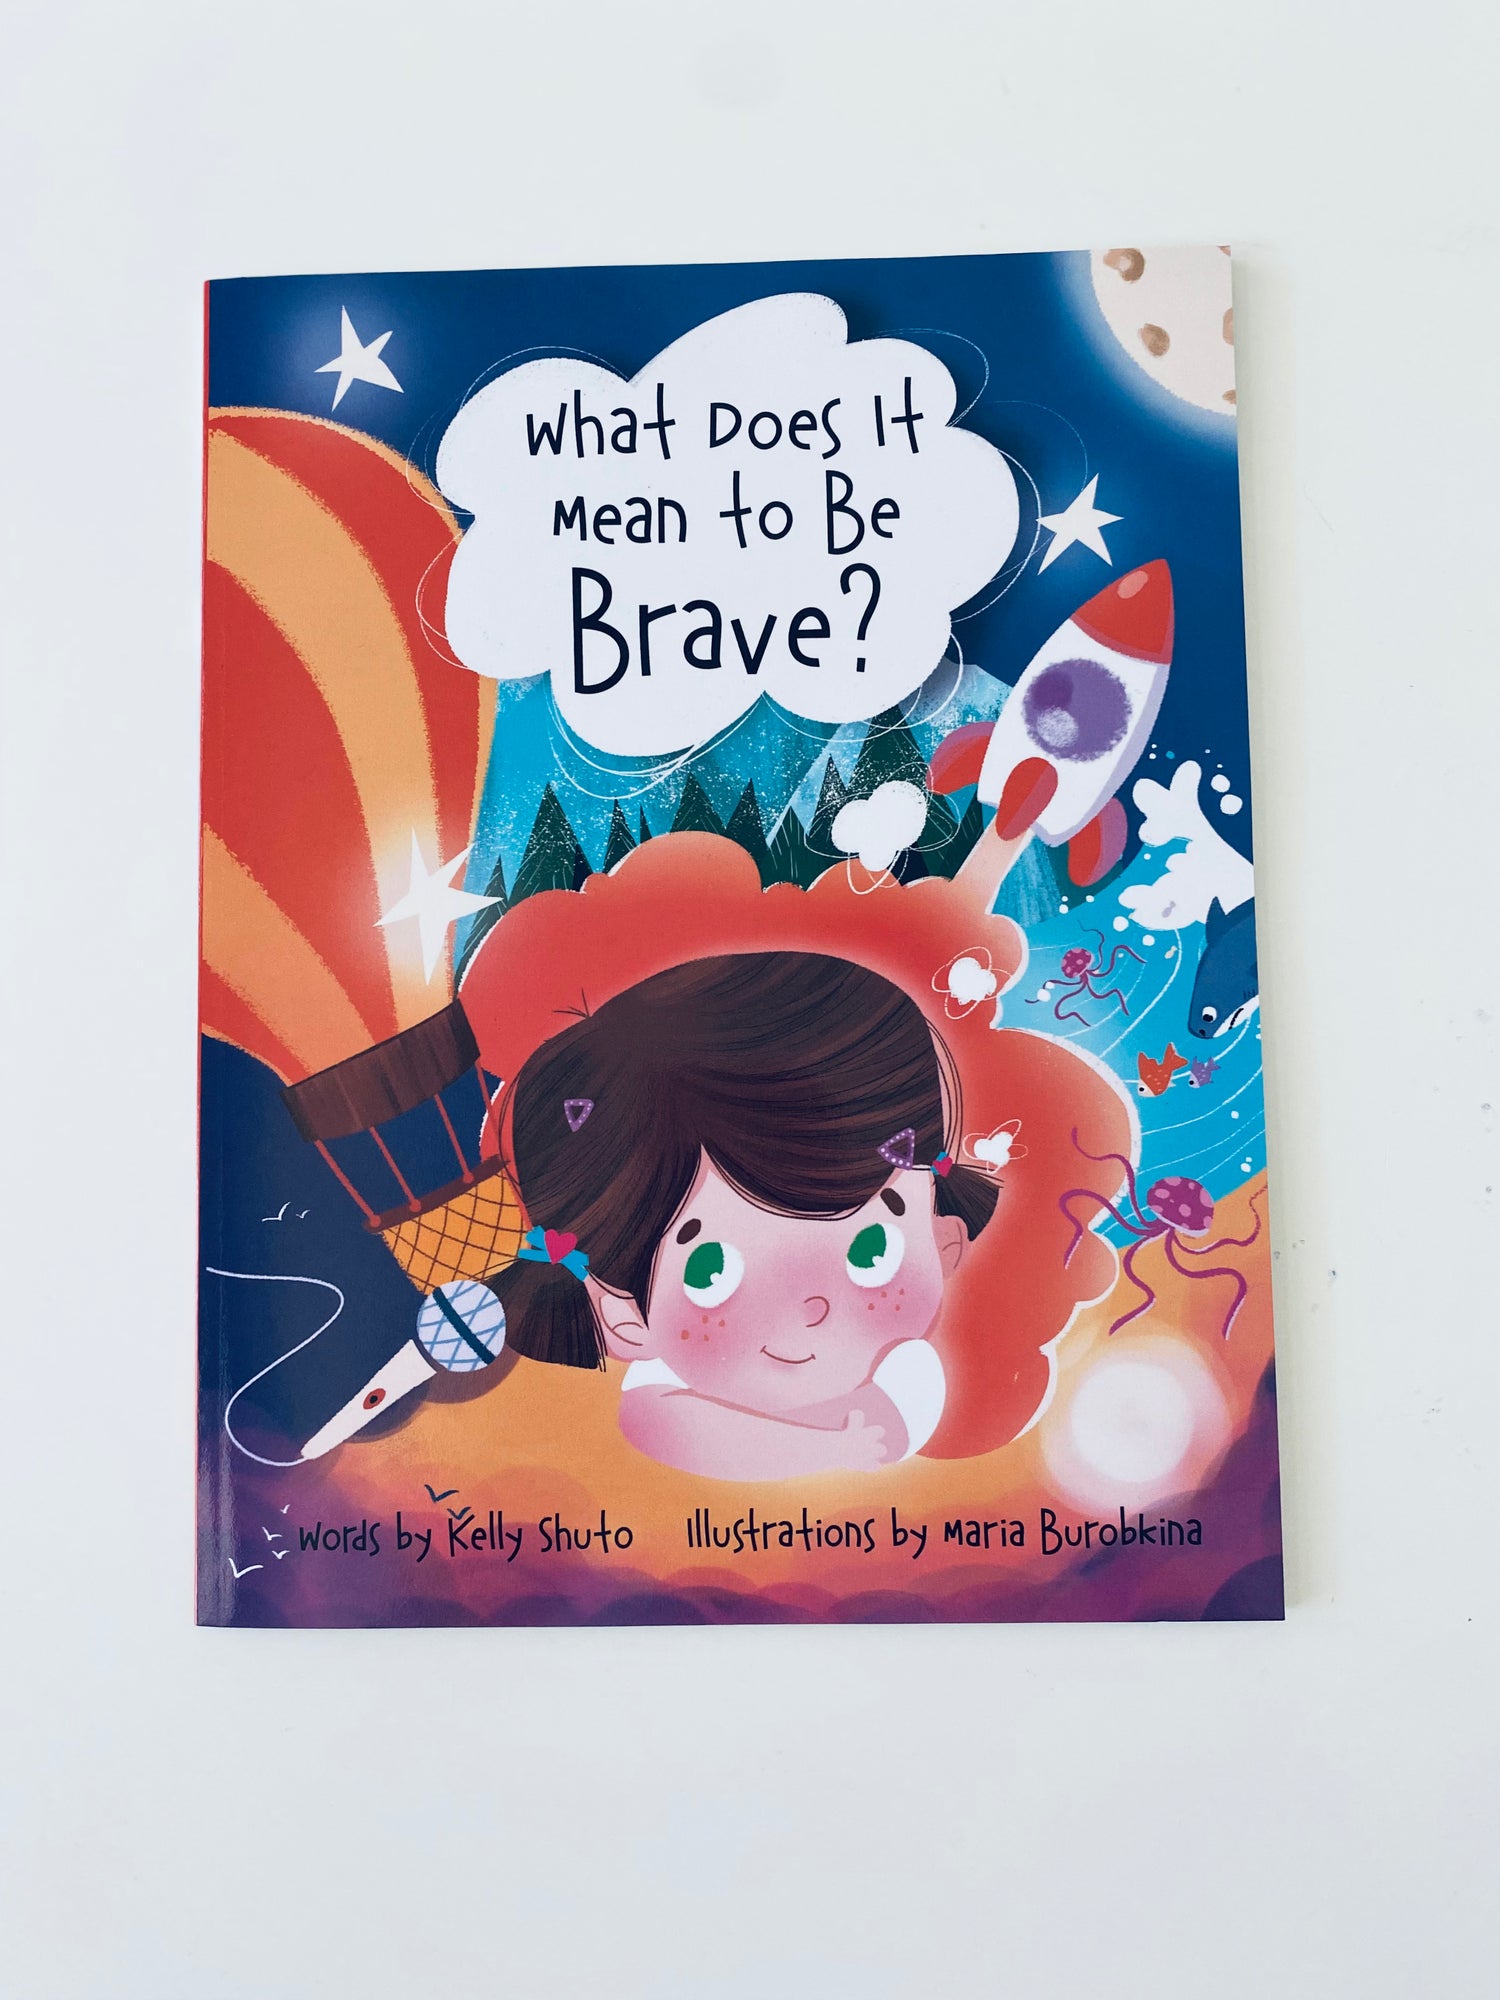 What Does It Mean to be Brave? (C'est quoi, le courage?)